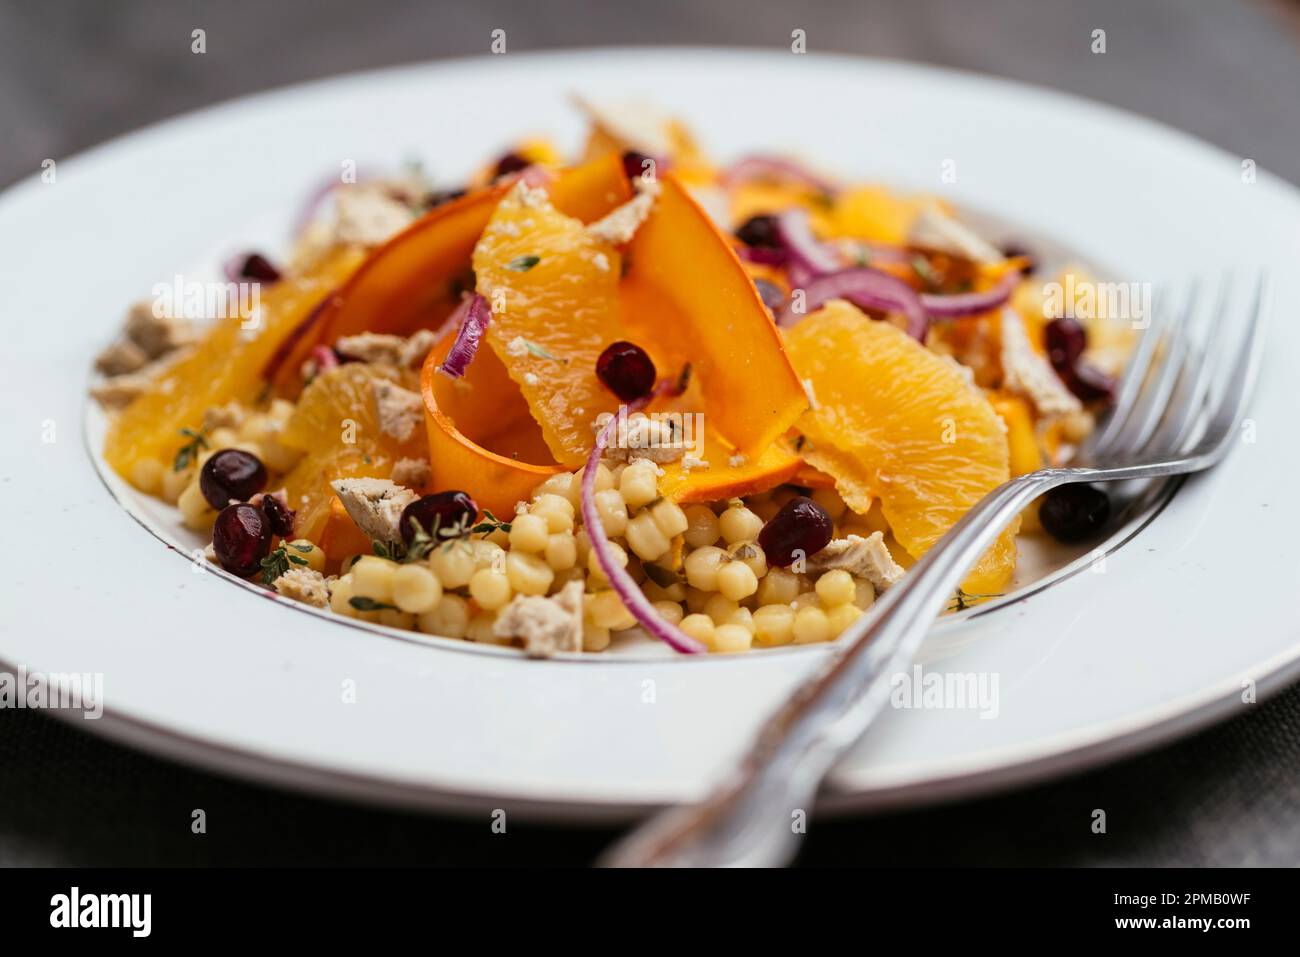 Salad with marinated winter squash, oranges and vegan feta on pearl couscous. Stock Photo